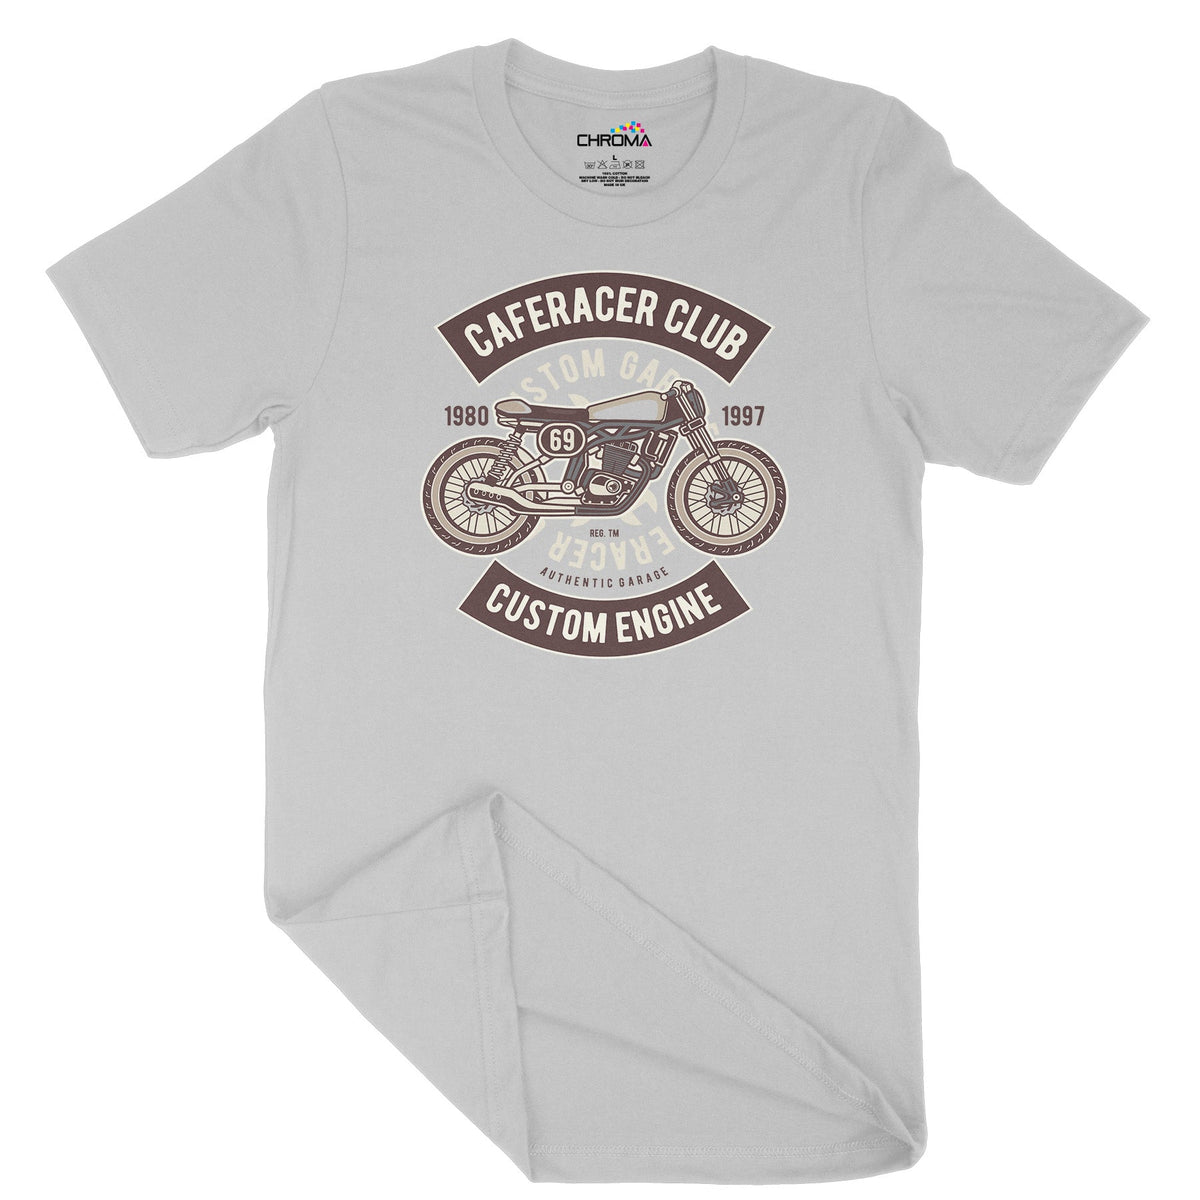 Caferacer Club | Vintage Adult T-Shirt | Classic Vintage Clothing Chroma Clothing